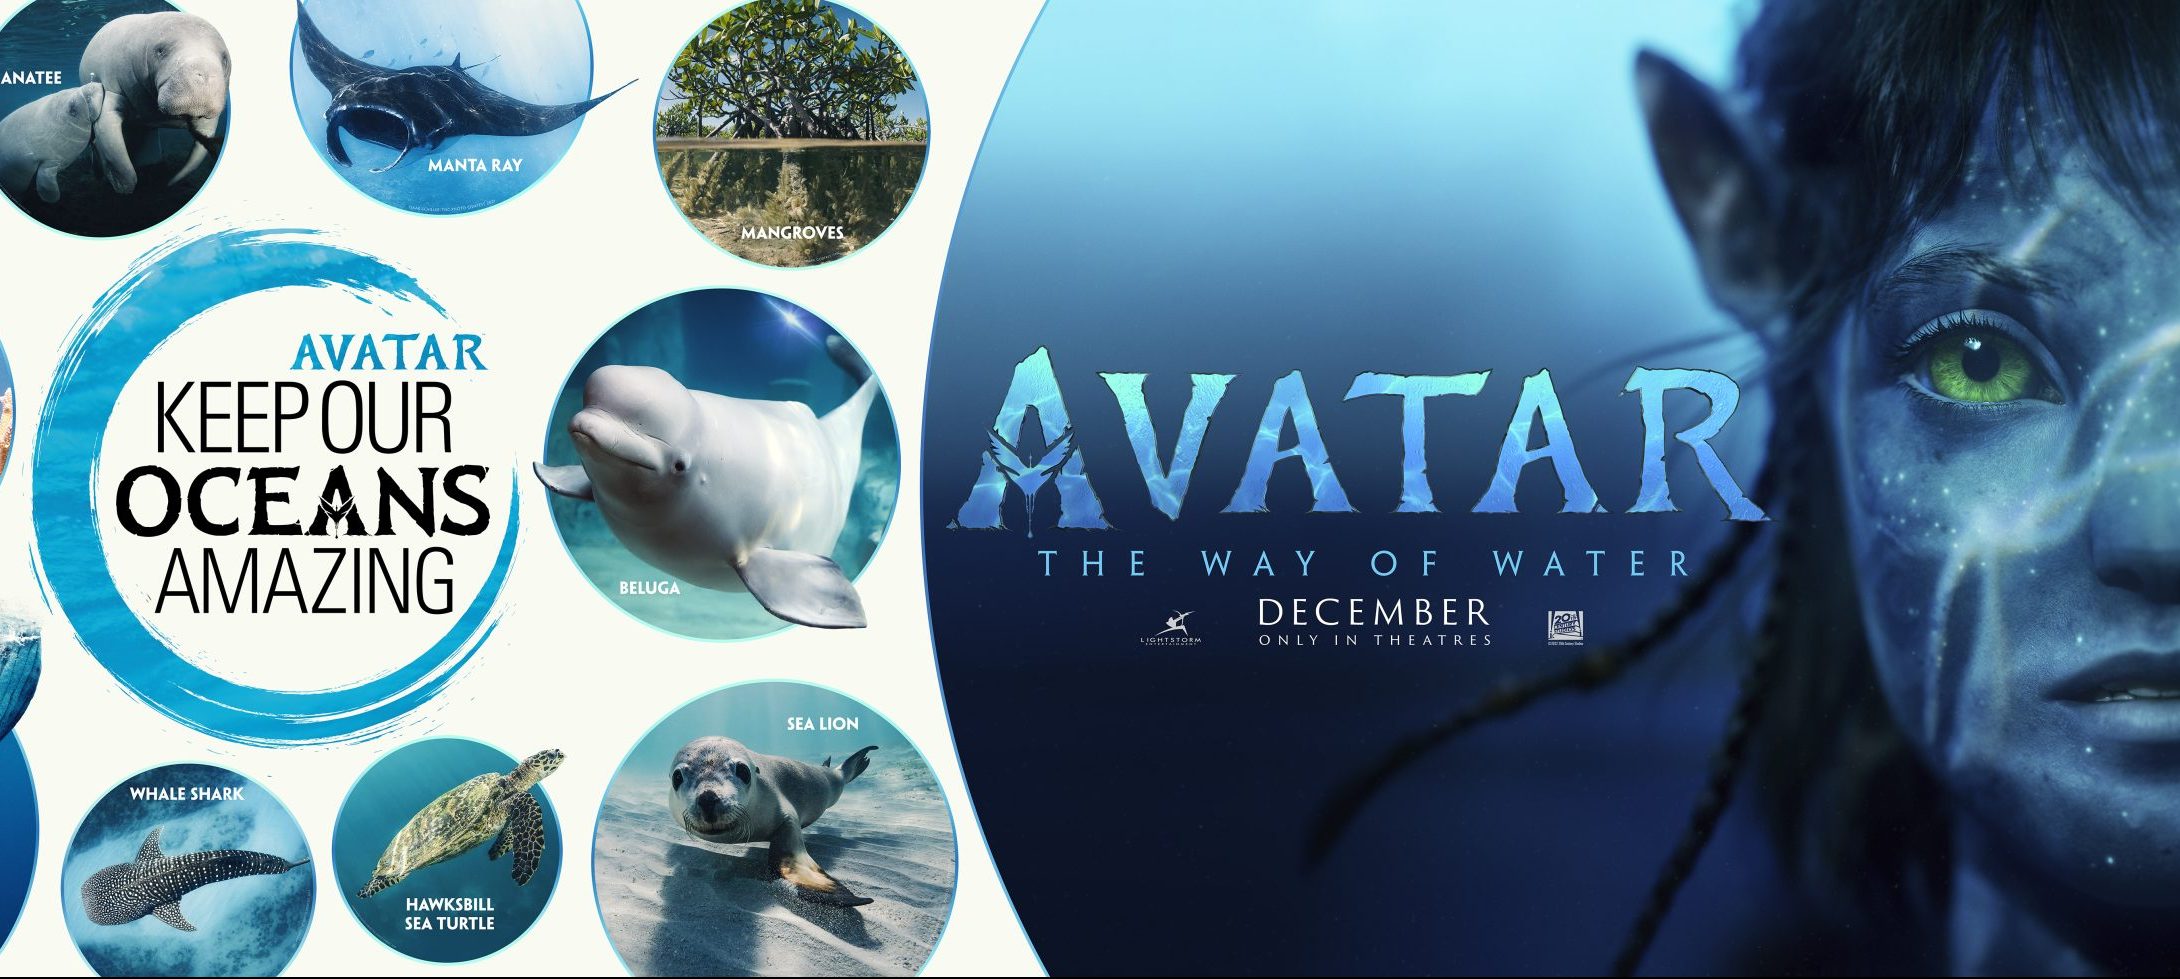 Disney and Avatar Announce Global “Keep Our Oceans Amazing” Campaign Ahead of 20th Century Studios’ Groundbreaking Film Avatar: The Way of Water 